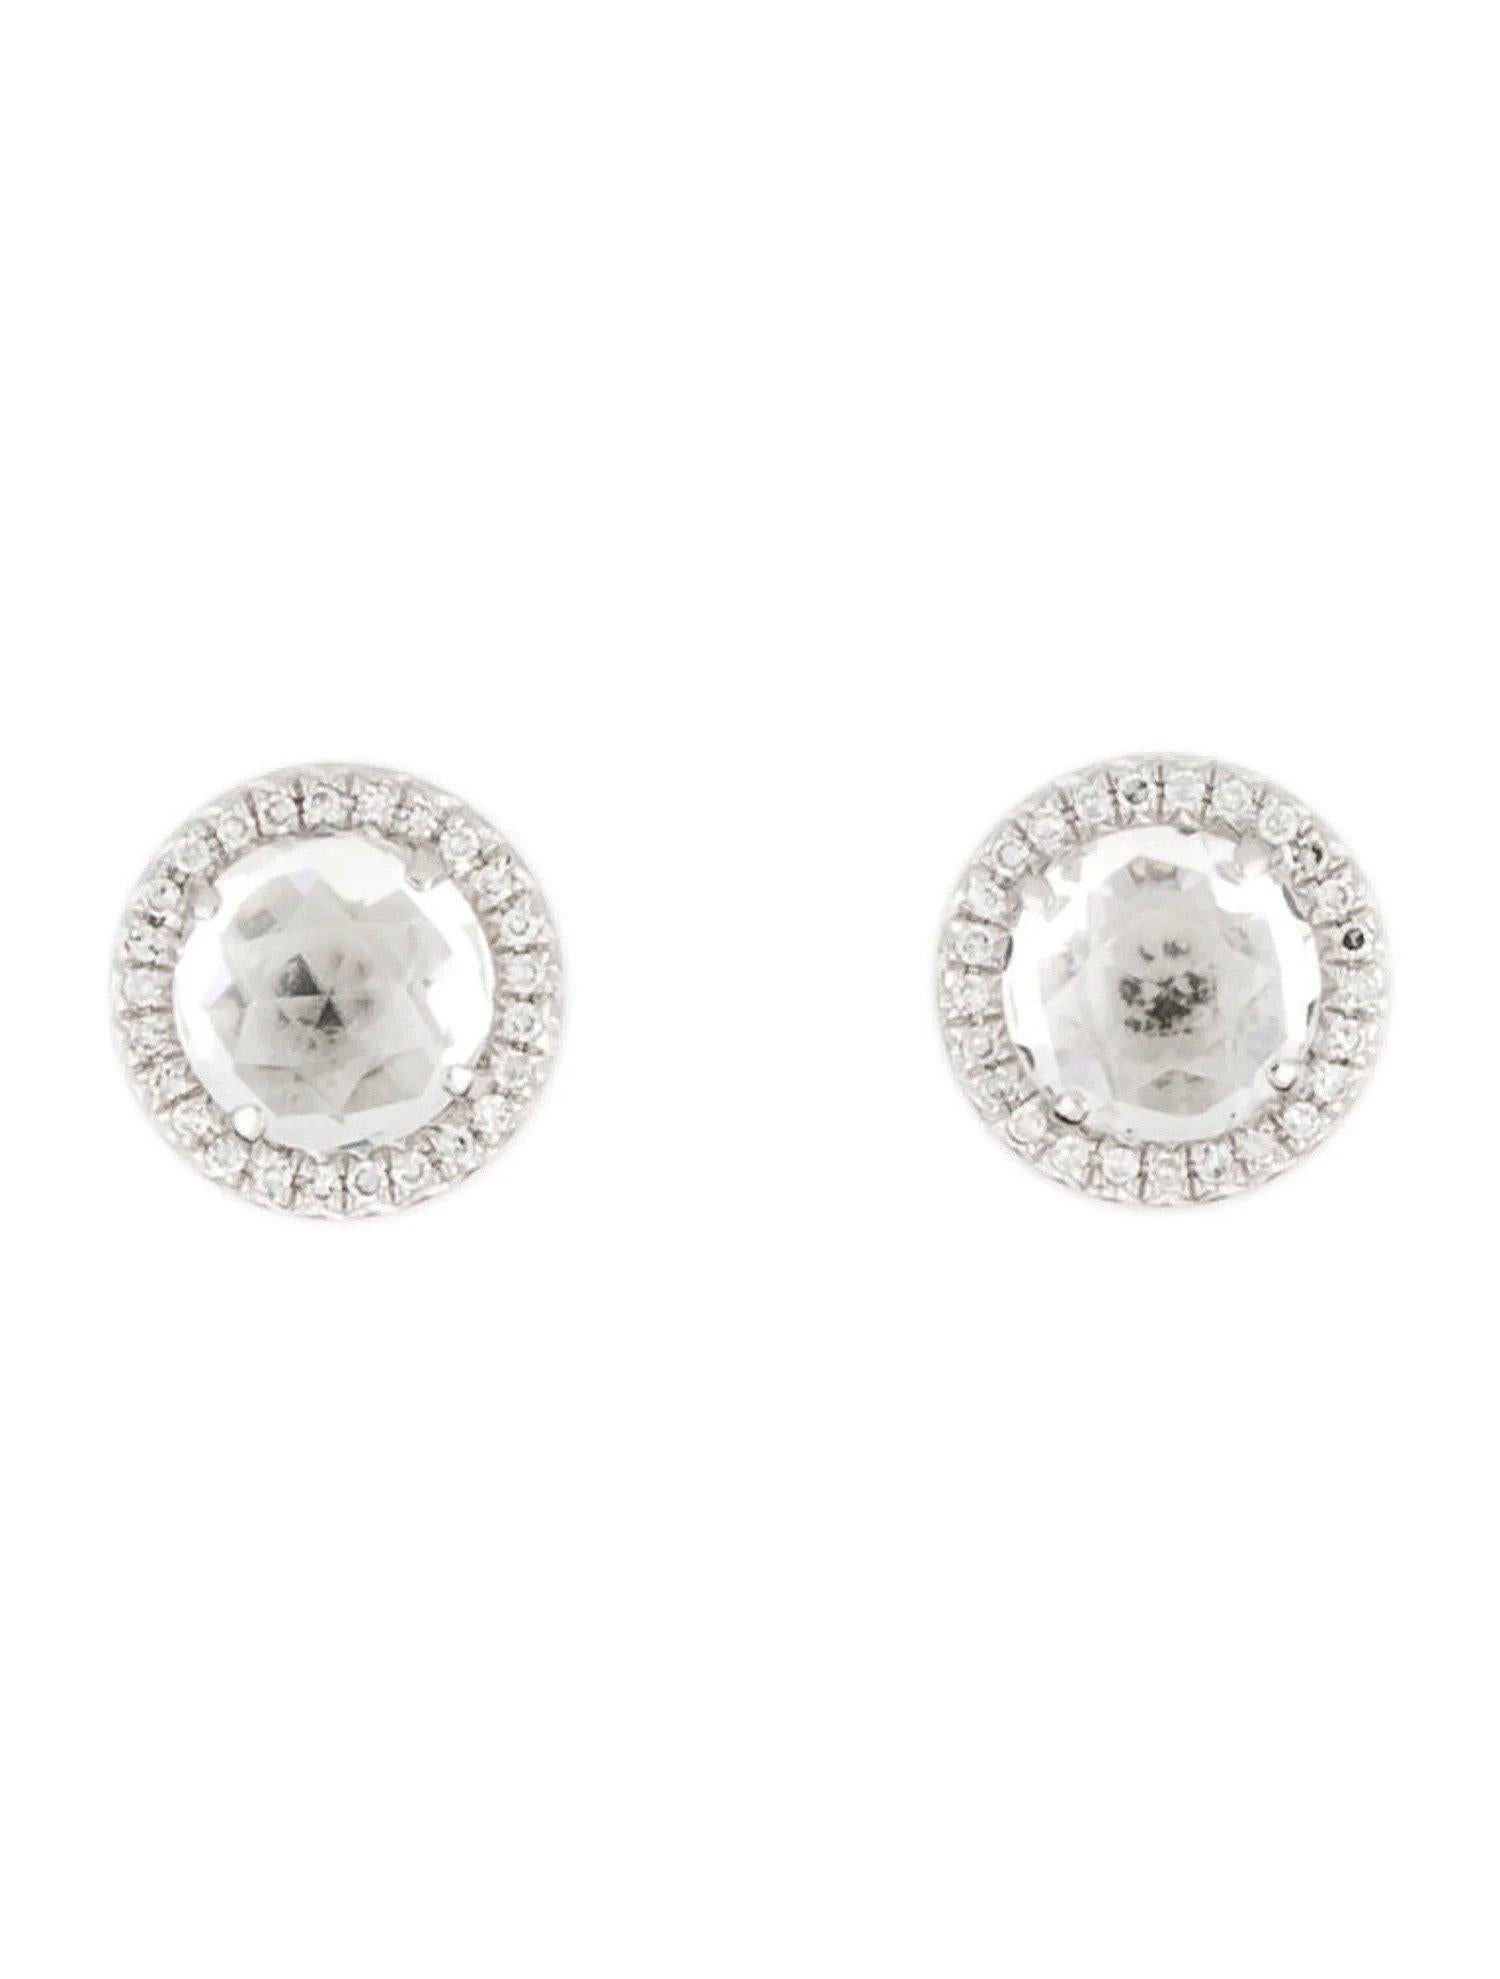 These White Topaz & Diamond Earrings are a stunning and timeless accessory that can add a touch of glamour and sophistication to any outfit. 

These earrings each feature a 1.25 Carat Round White Topaz, with a Diamond Halo comprised of 0.06 Carats